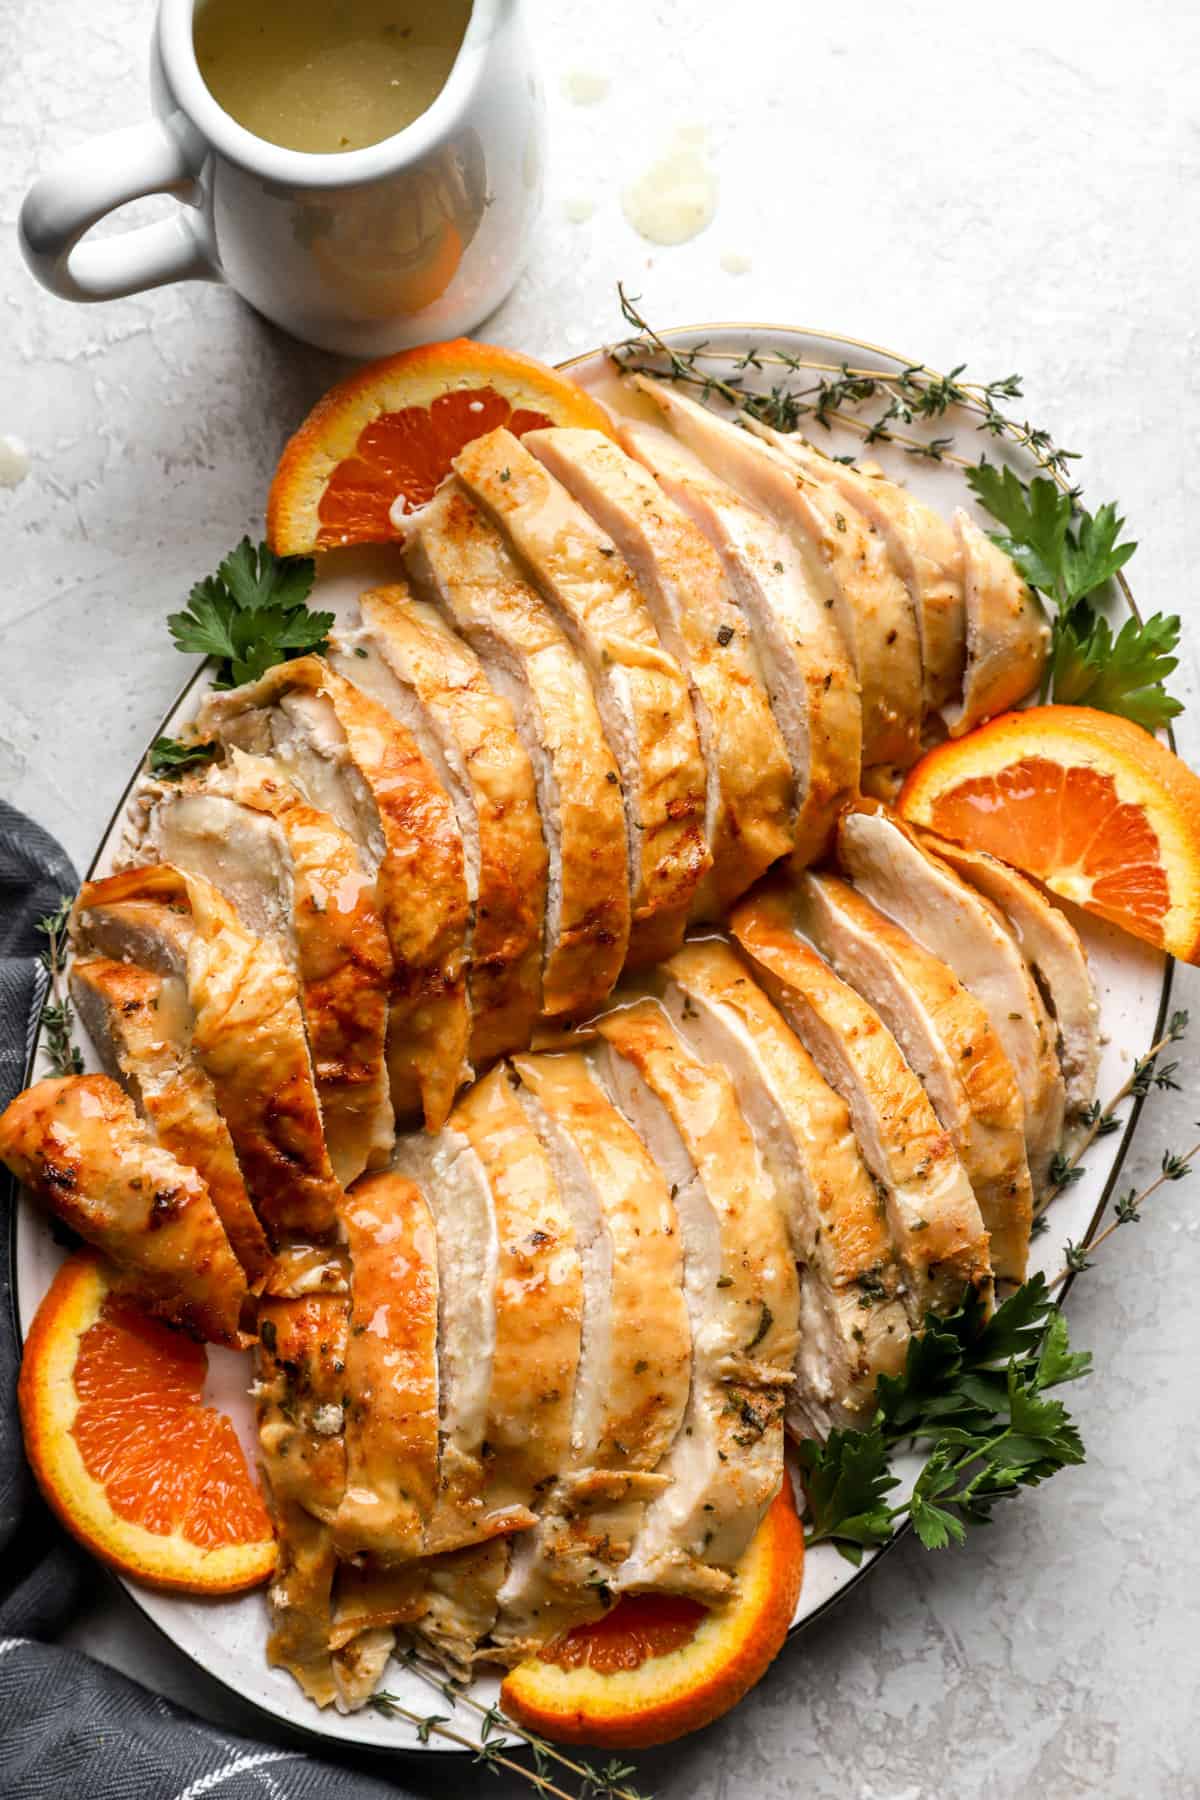 above image of a sliced roasted turkey on a platter garnished with orange slices and greens.